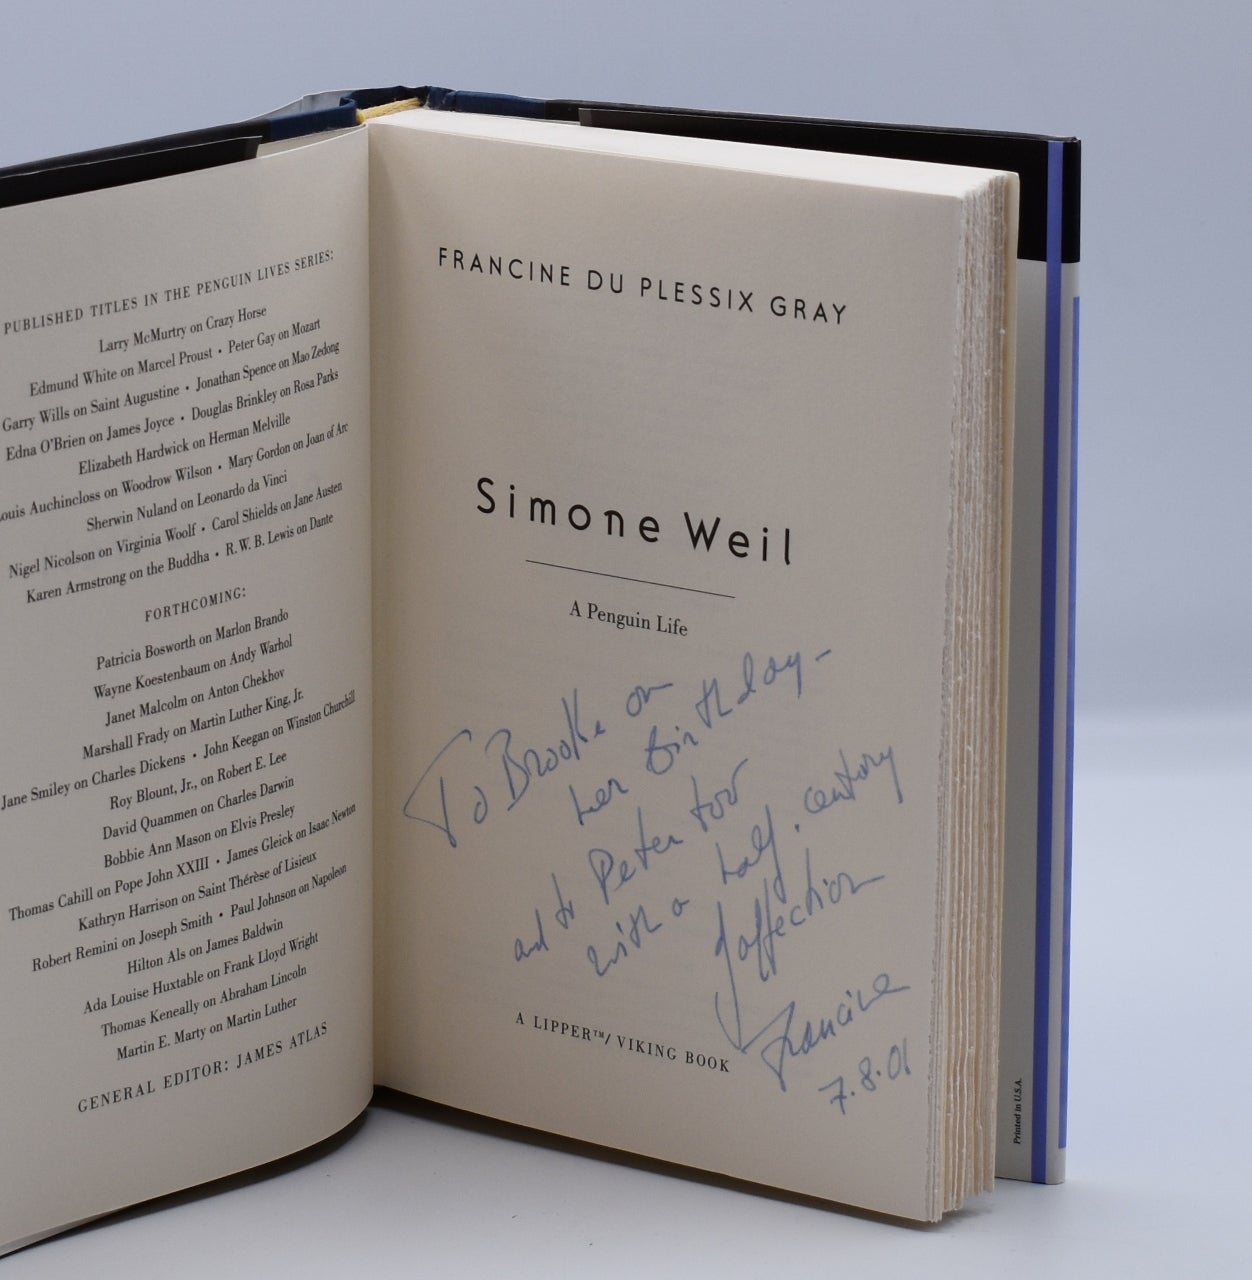 SIMONE WEIL: A Penguin Life by Francine du Plessix Gray on Quill & Brush,  Inc